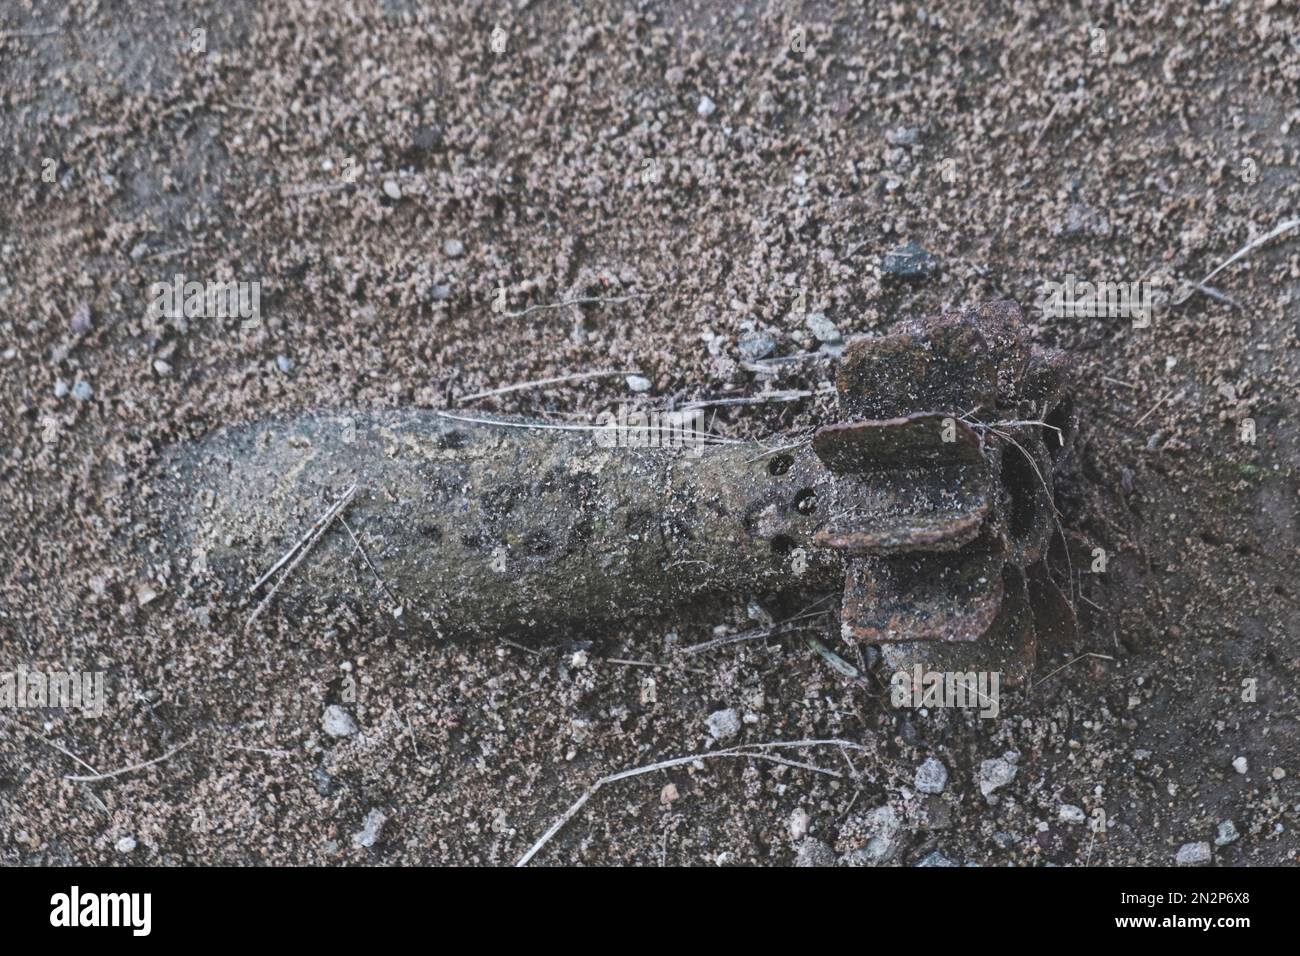 Unexploded bomb buried in a field in Cambodia - a leftover from the Khmer Rouge and Vietnam conflicts of the 20th Century Stock Photo